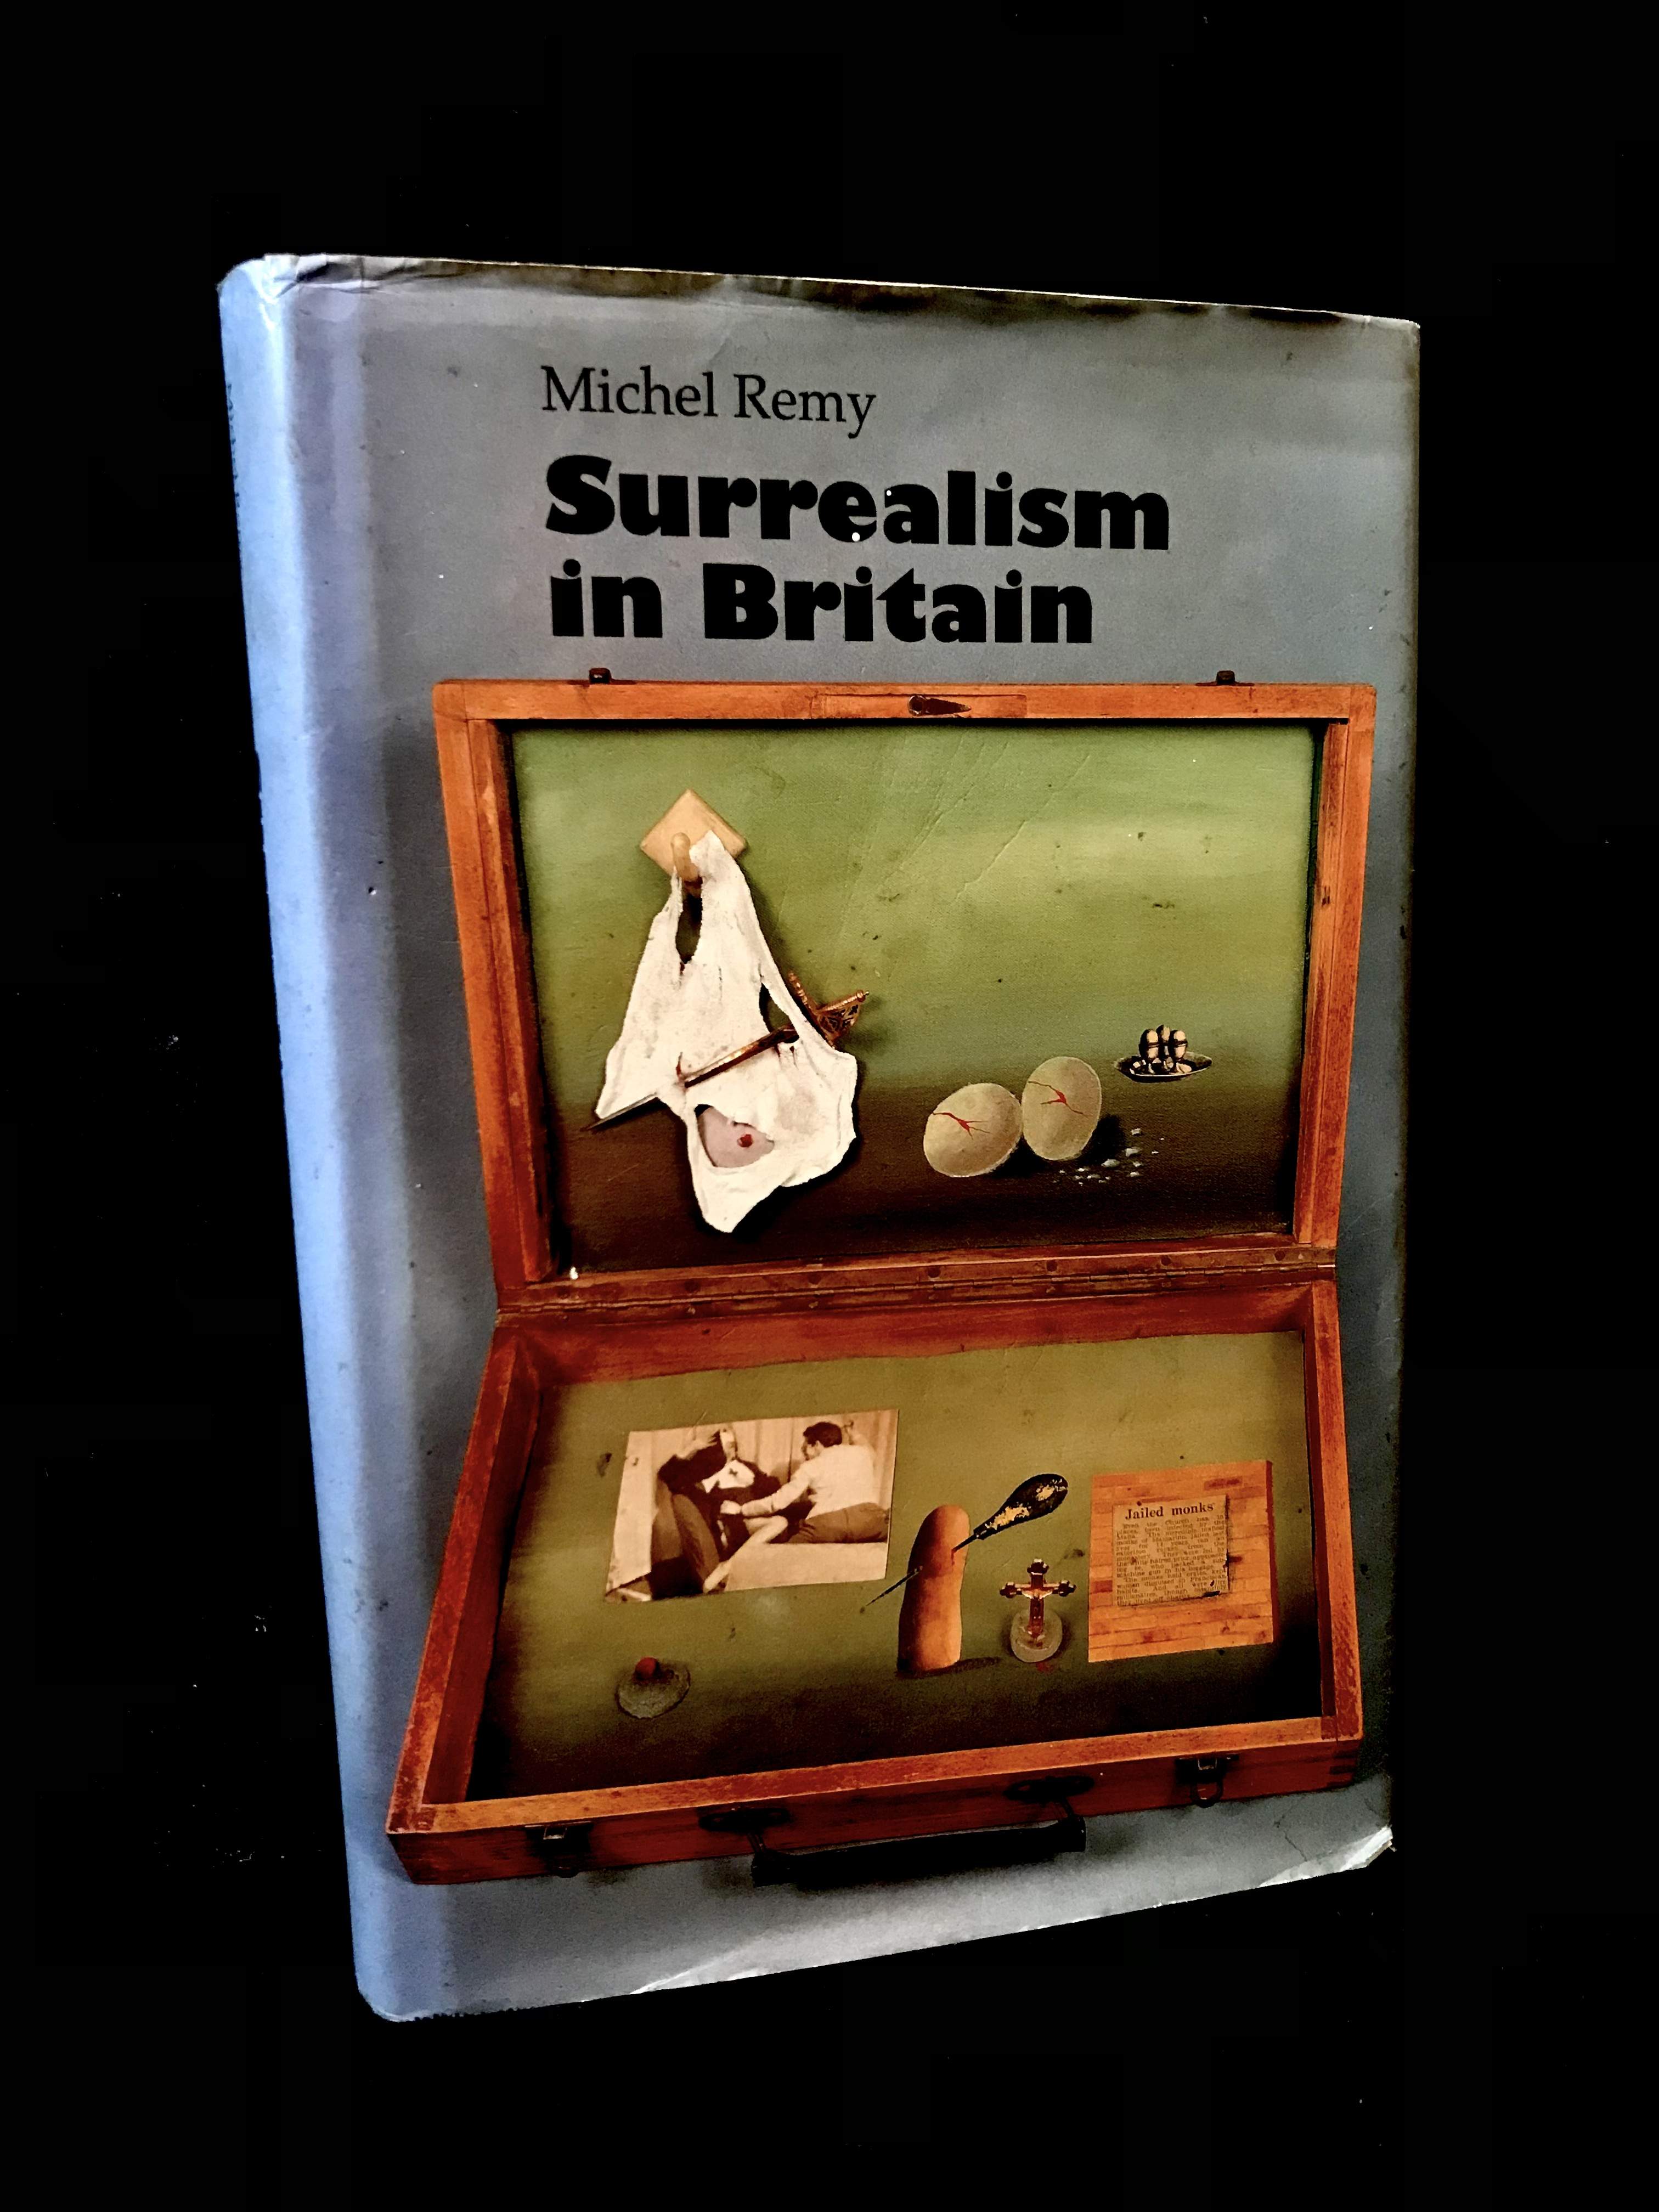 Surrealism In Britian by Michael Remy